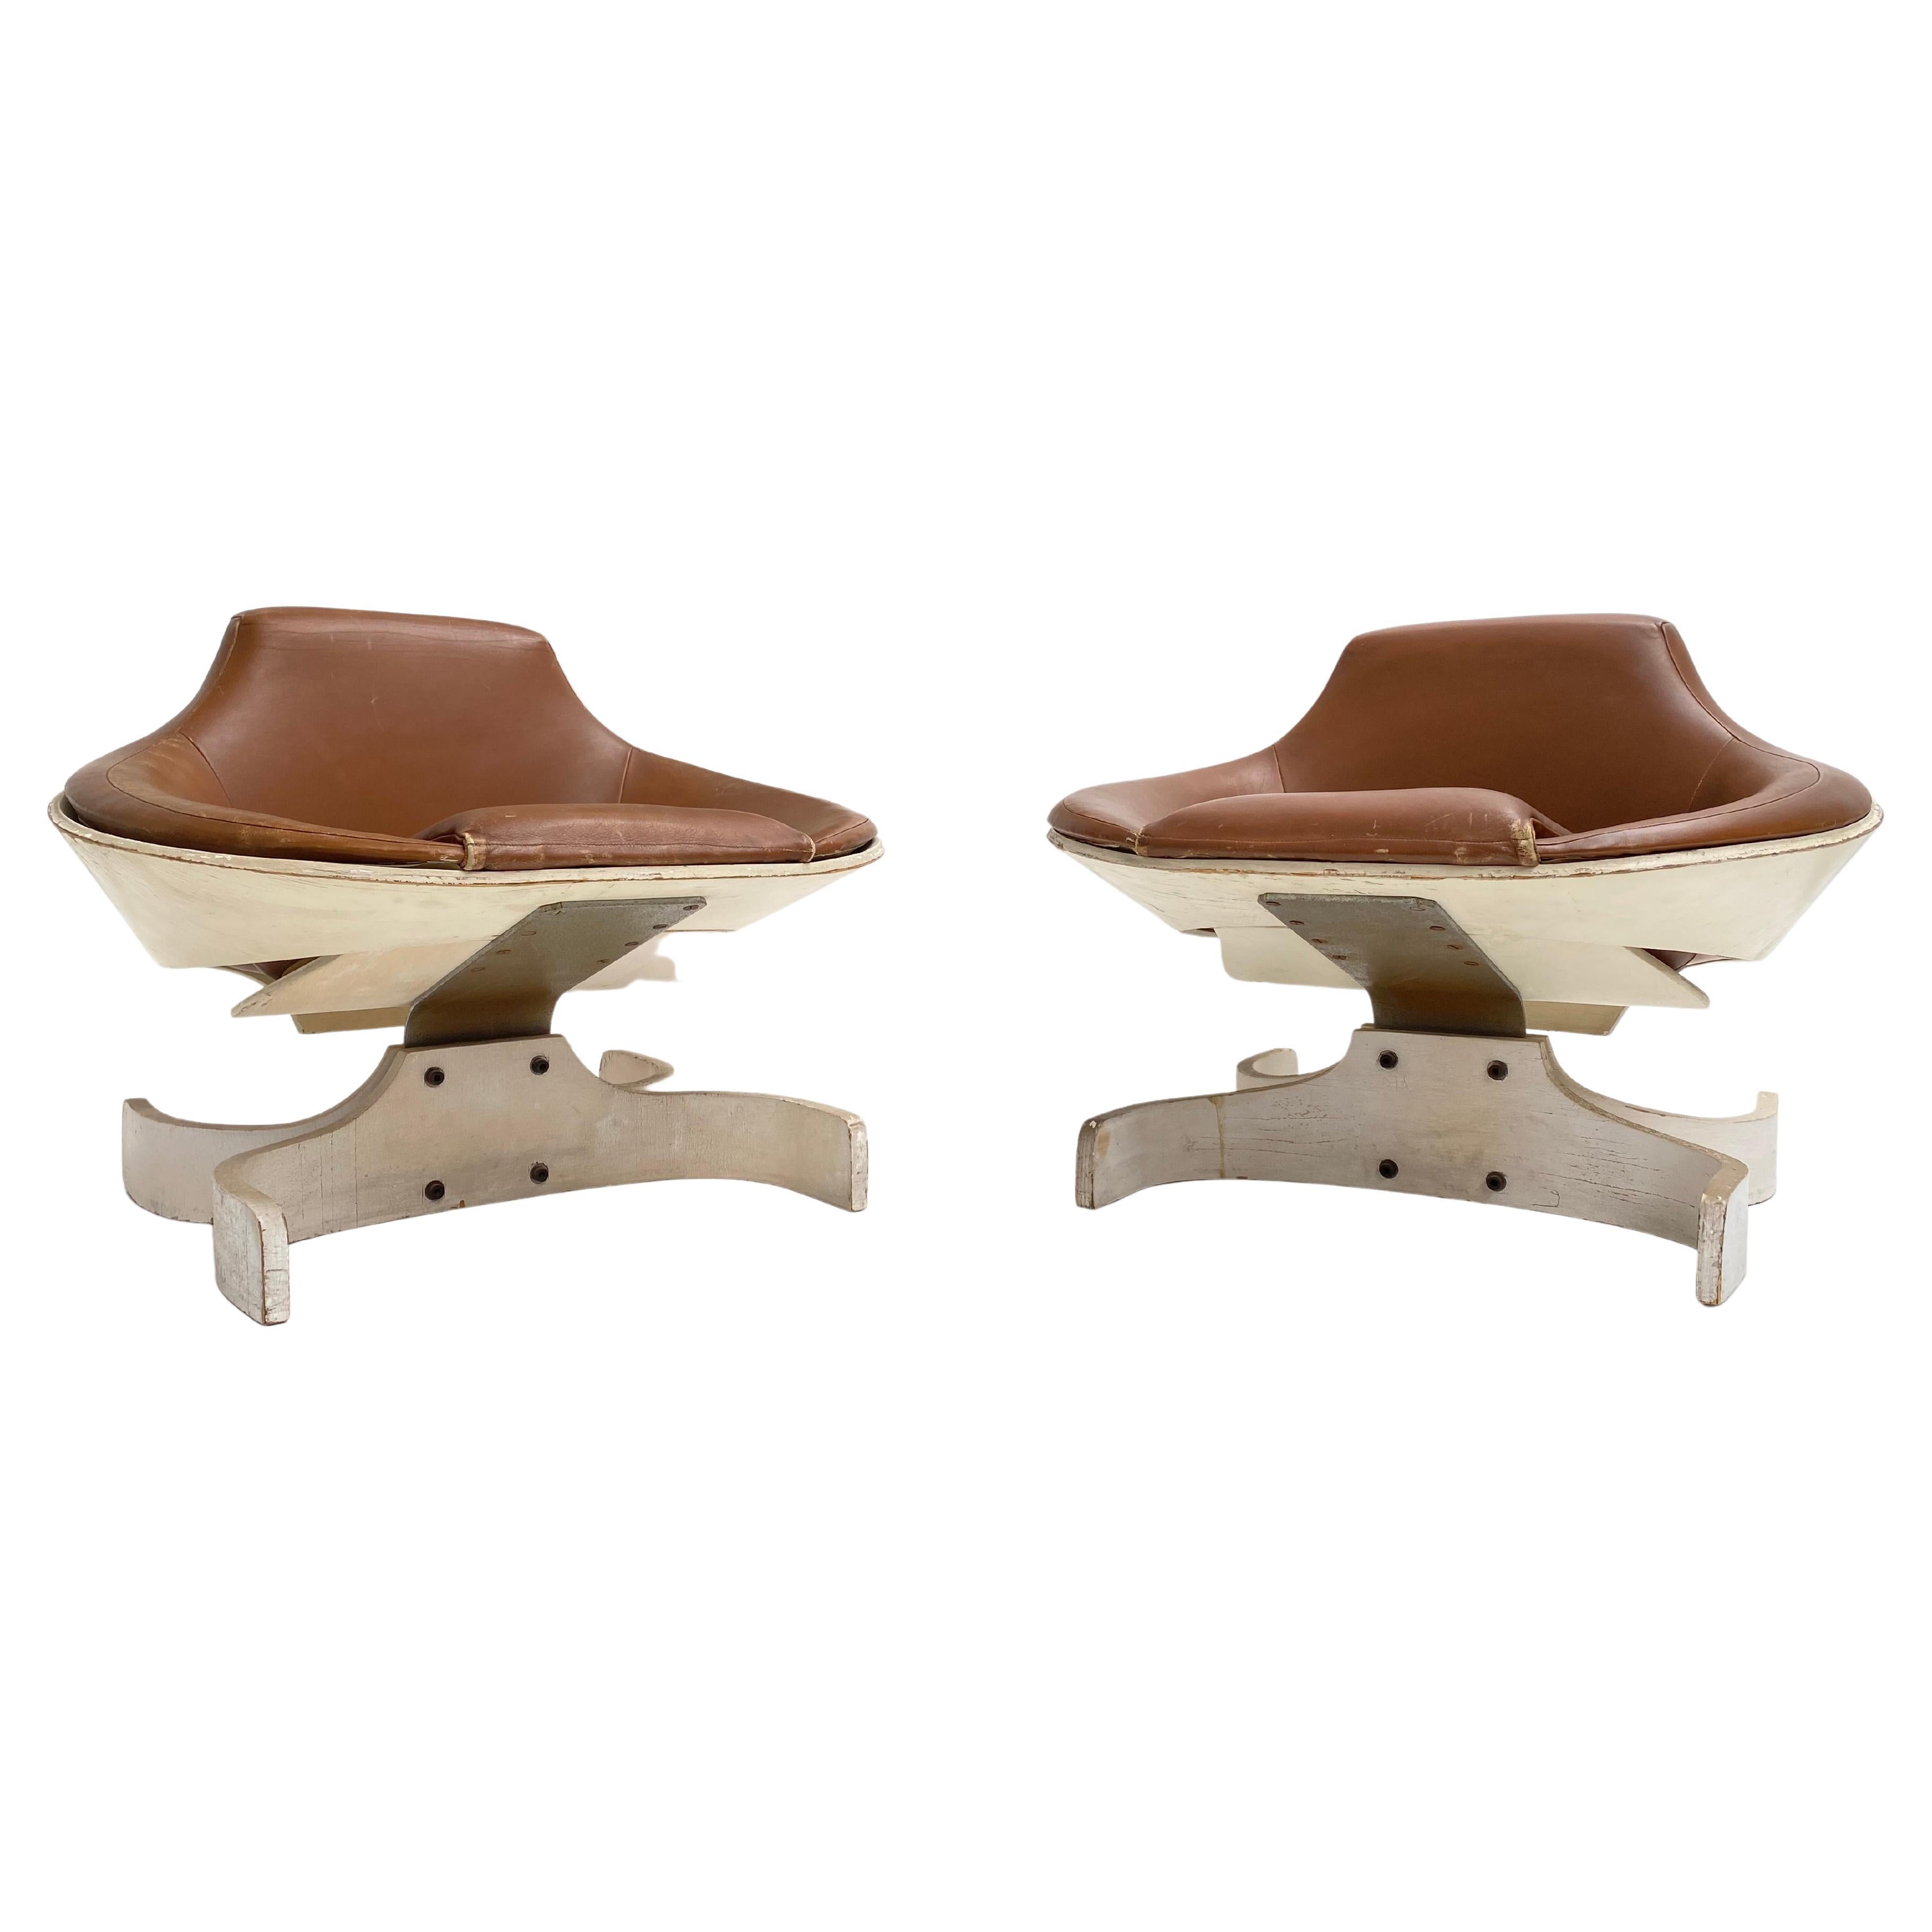 Super Rare Pair of Joe Colombo 'Sella 1001' Lounge Chairs by Comfort 1963 Italy For Sale